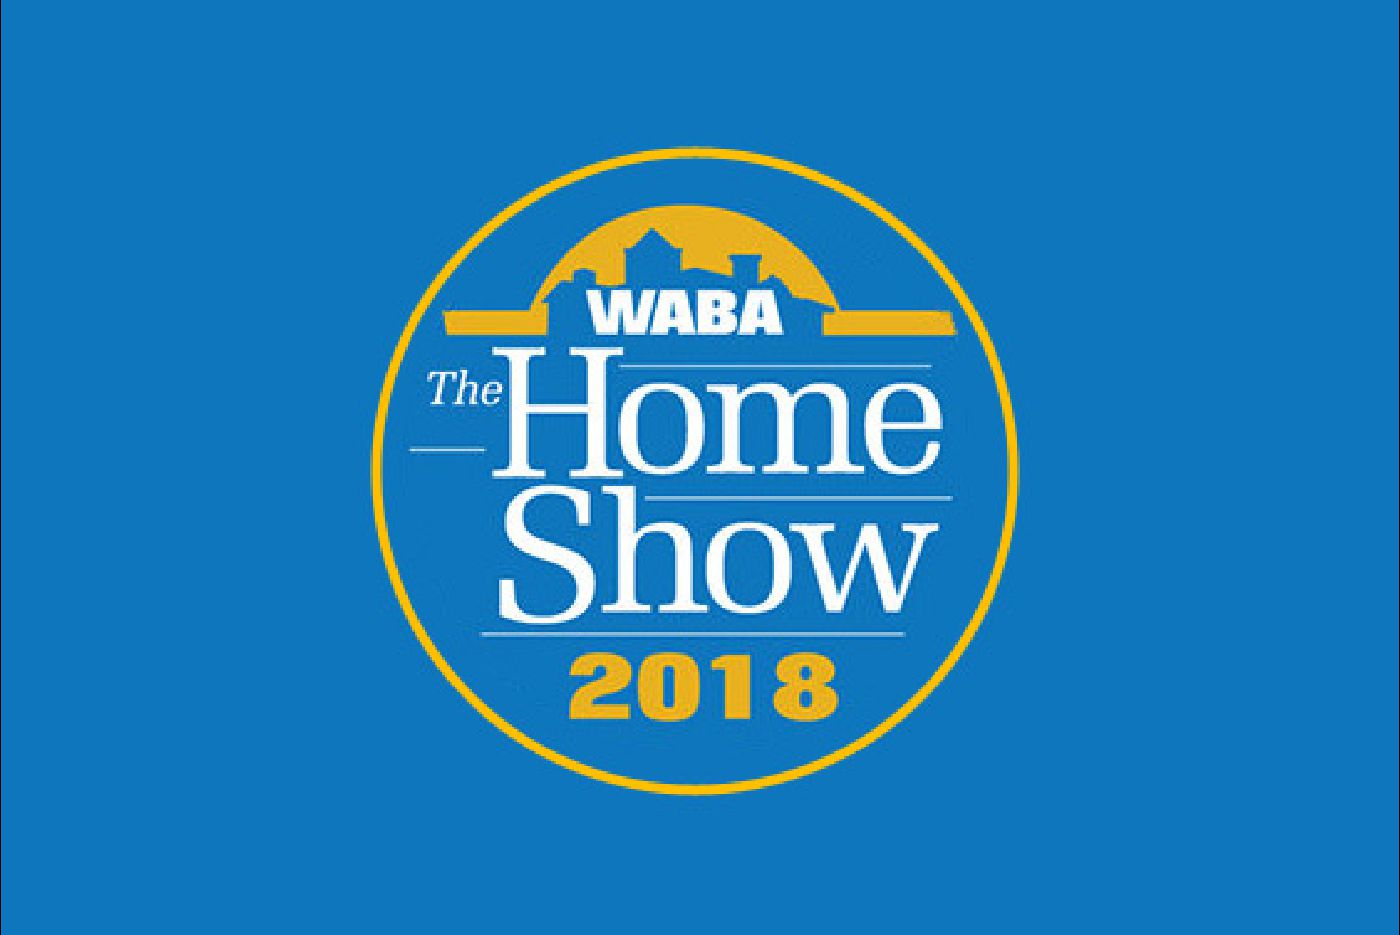 Visit us at the 2018 WABA home show the iron door project